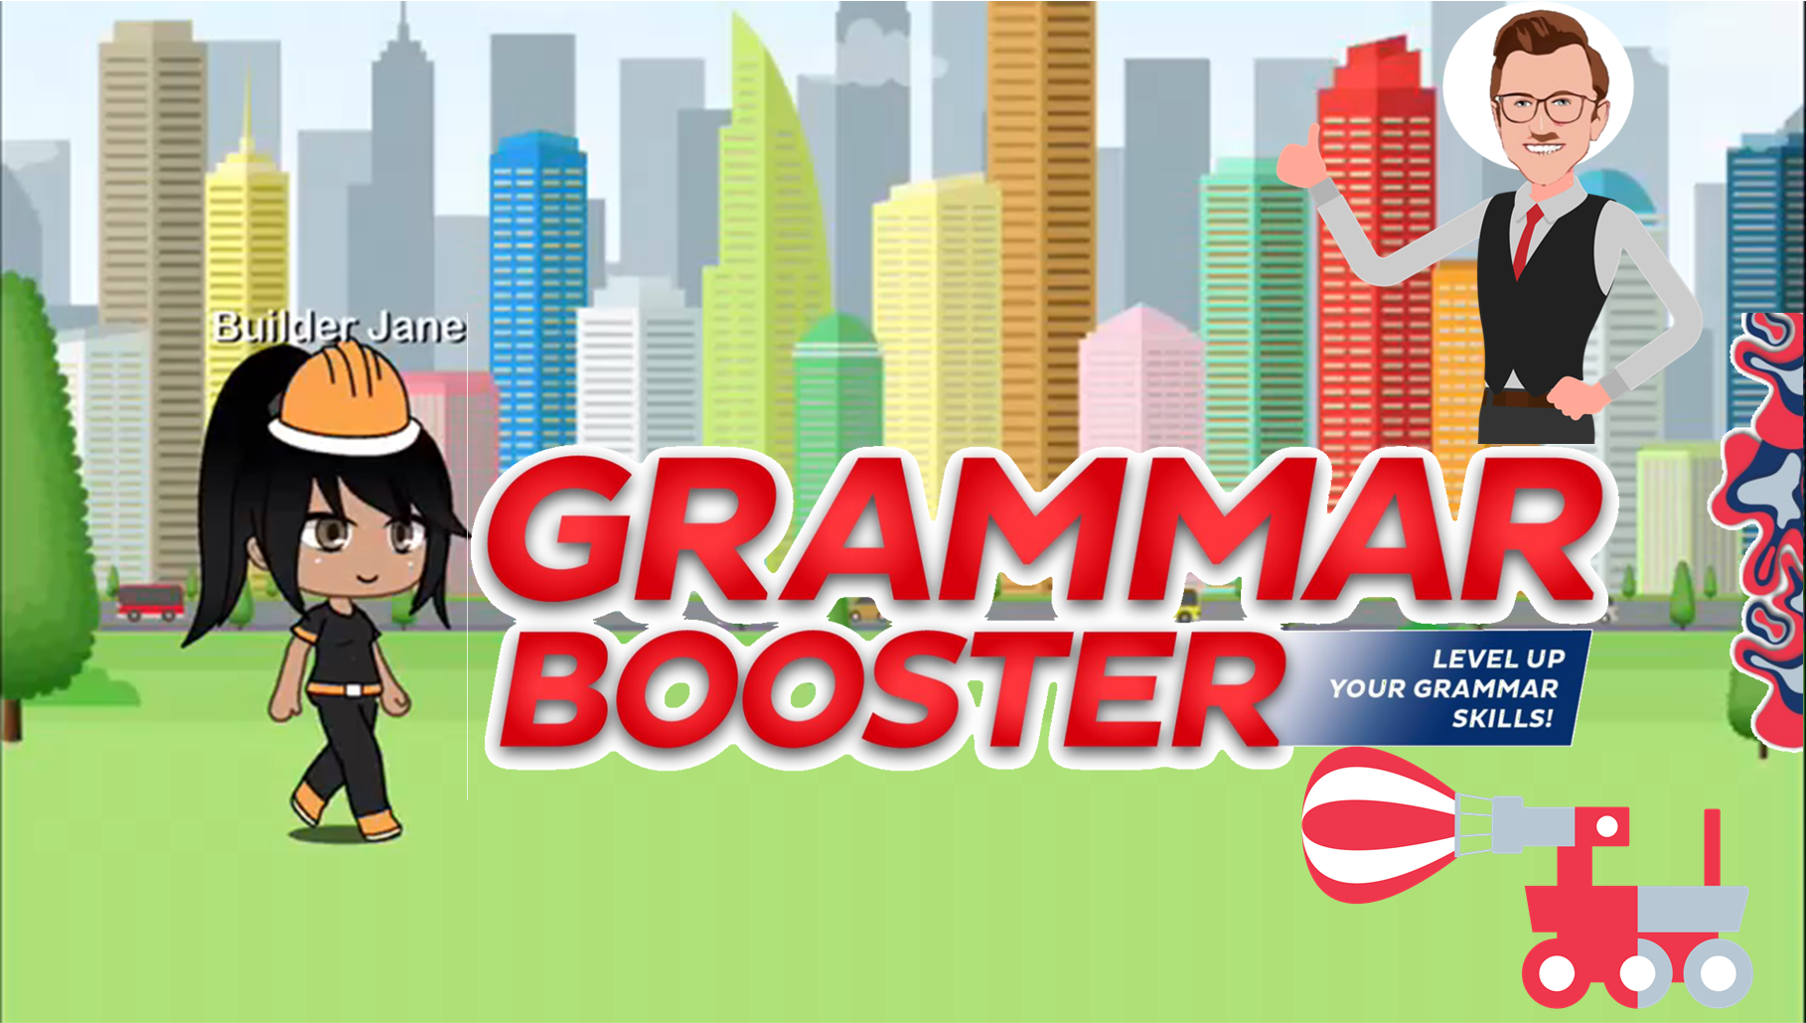 Flying with Grammar Booster